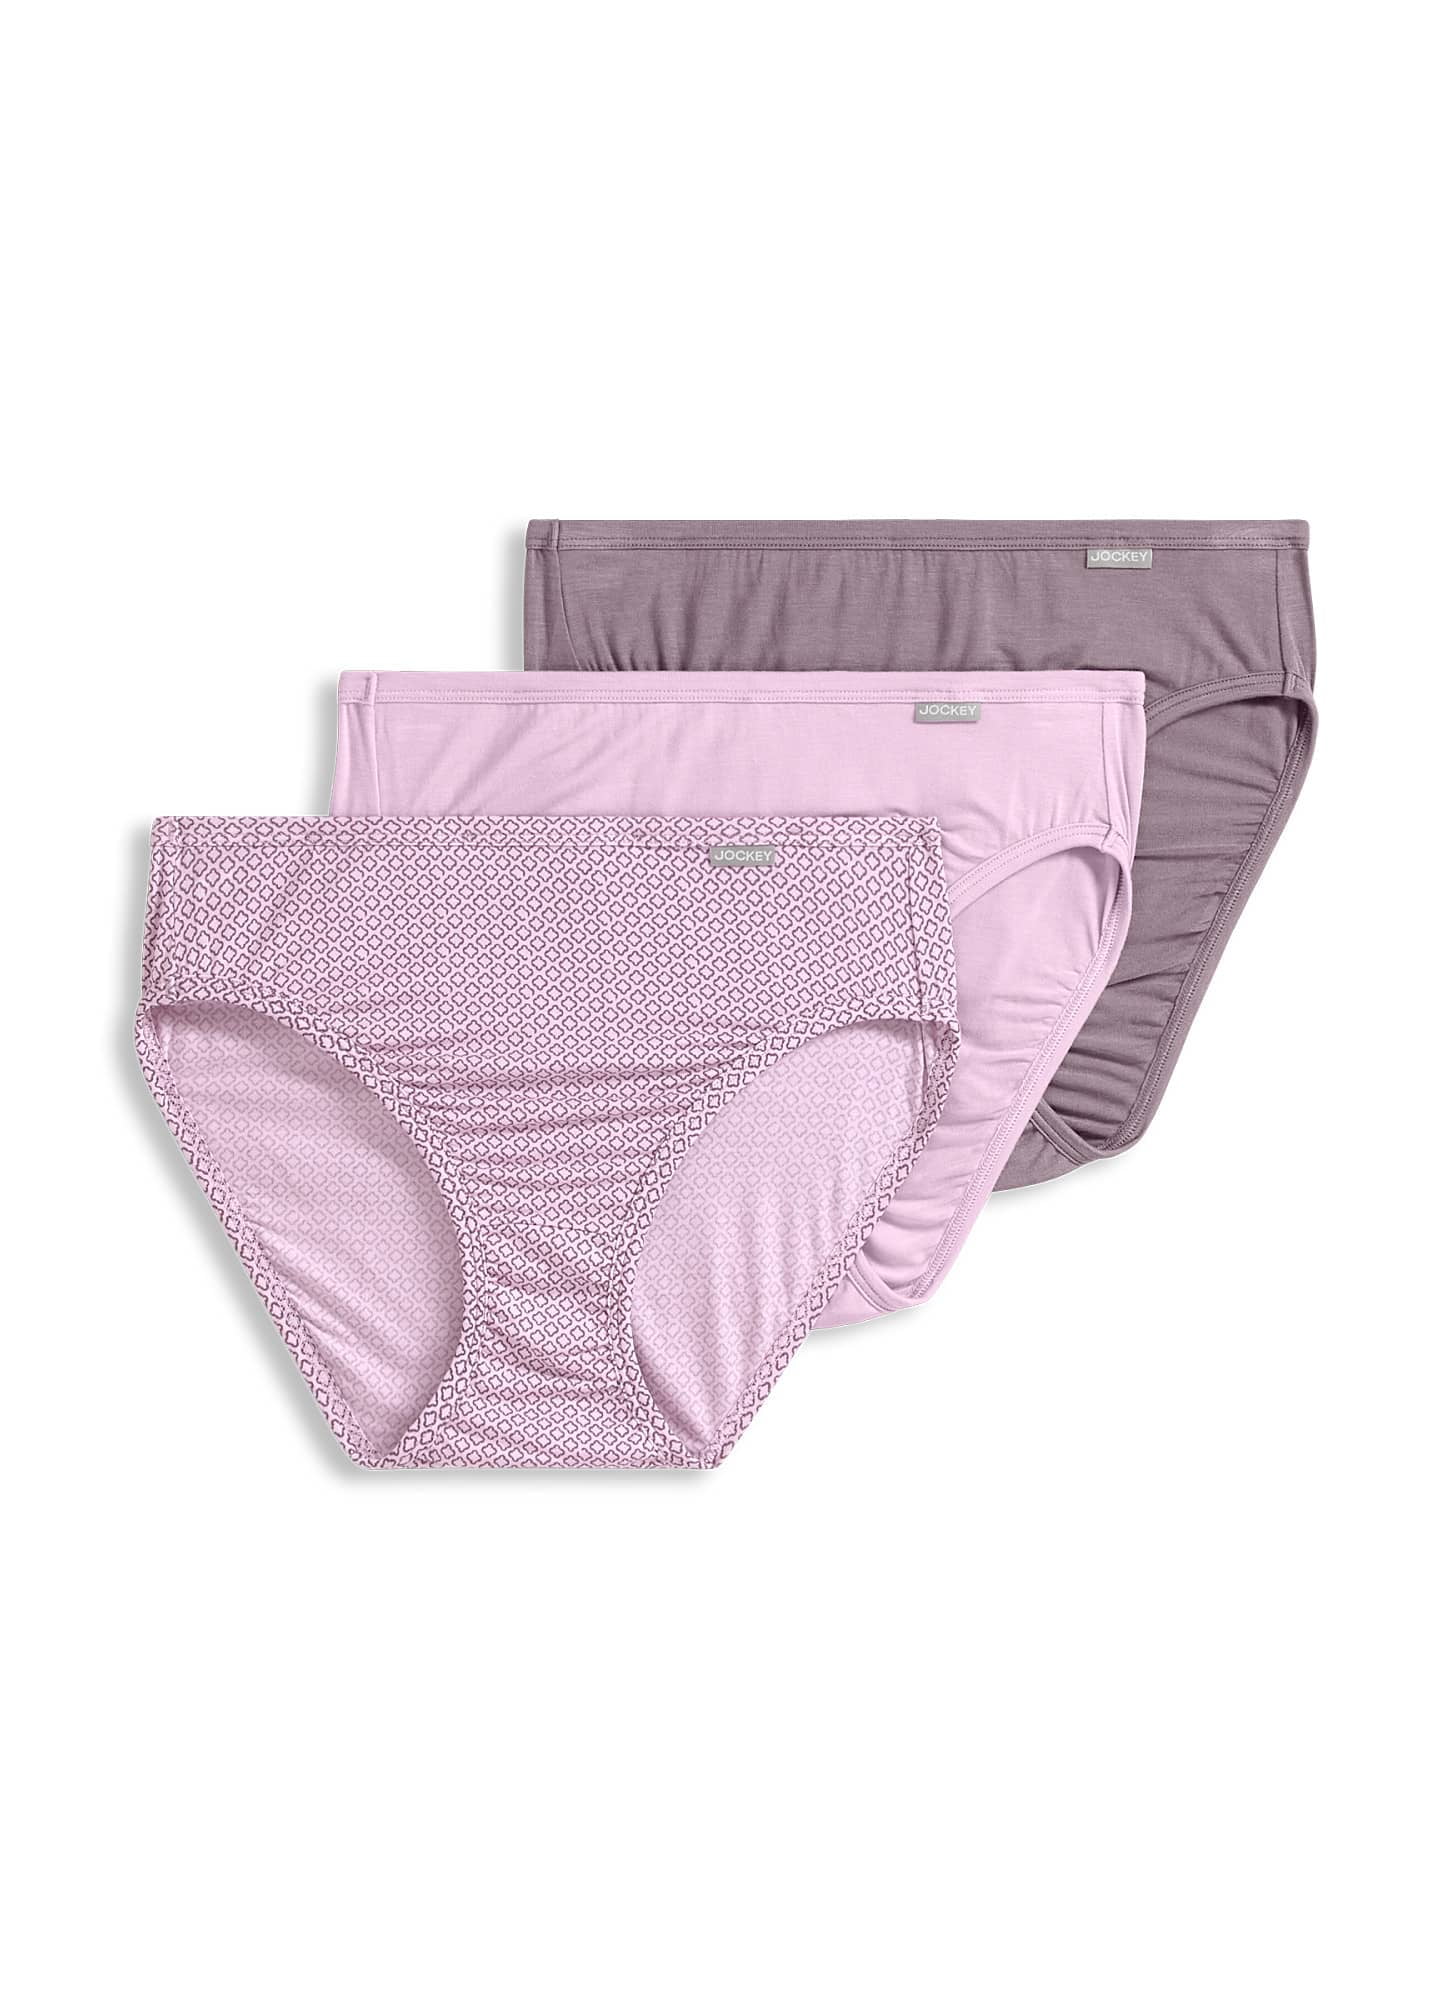 Jockey® Supersoft French Cut - 3 Pack